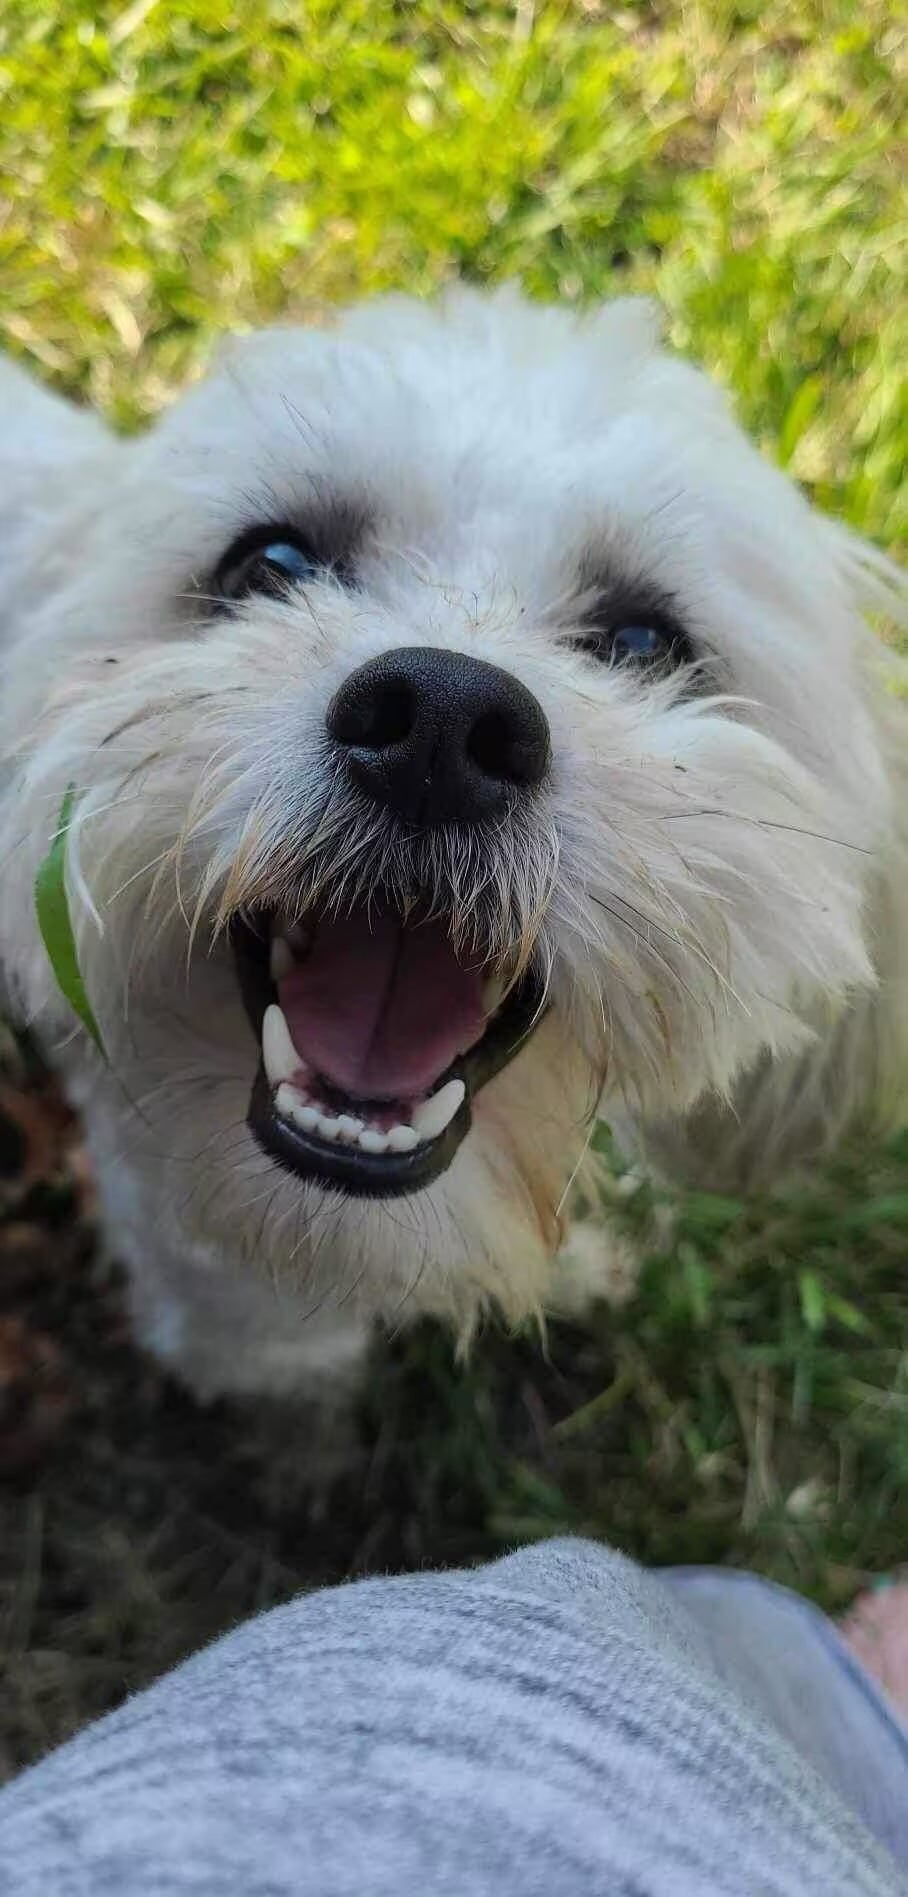 Teddy, a disabled Shih Tzu was shot dead by a police officer